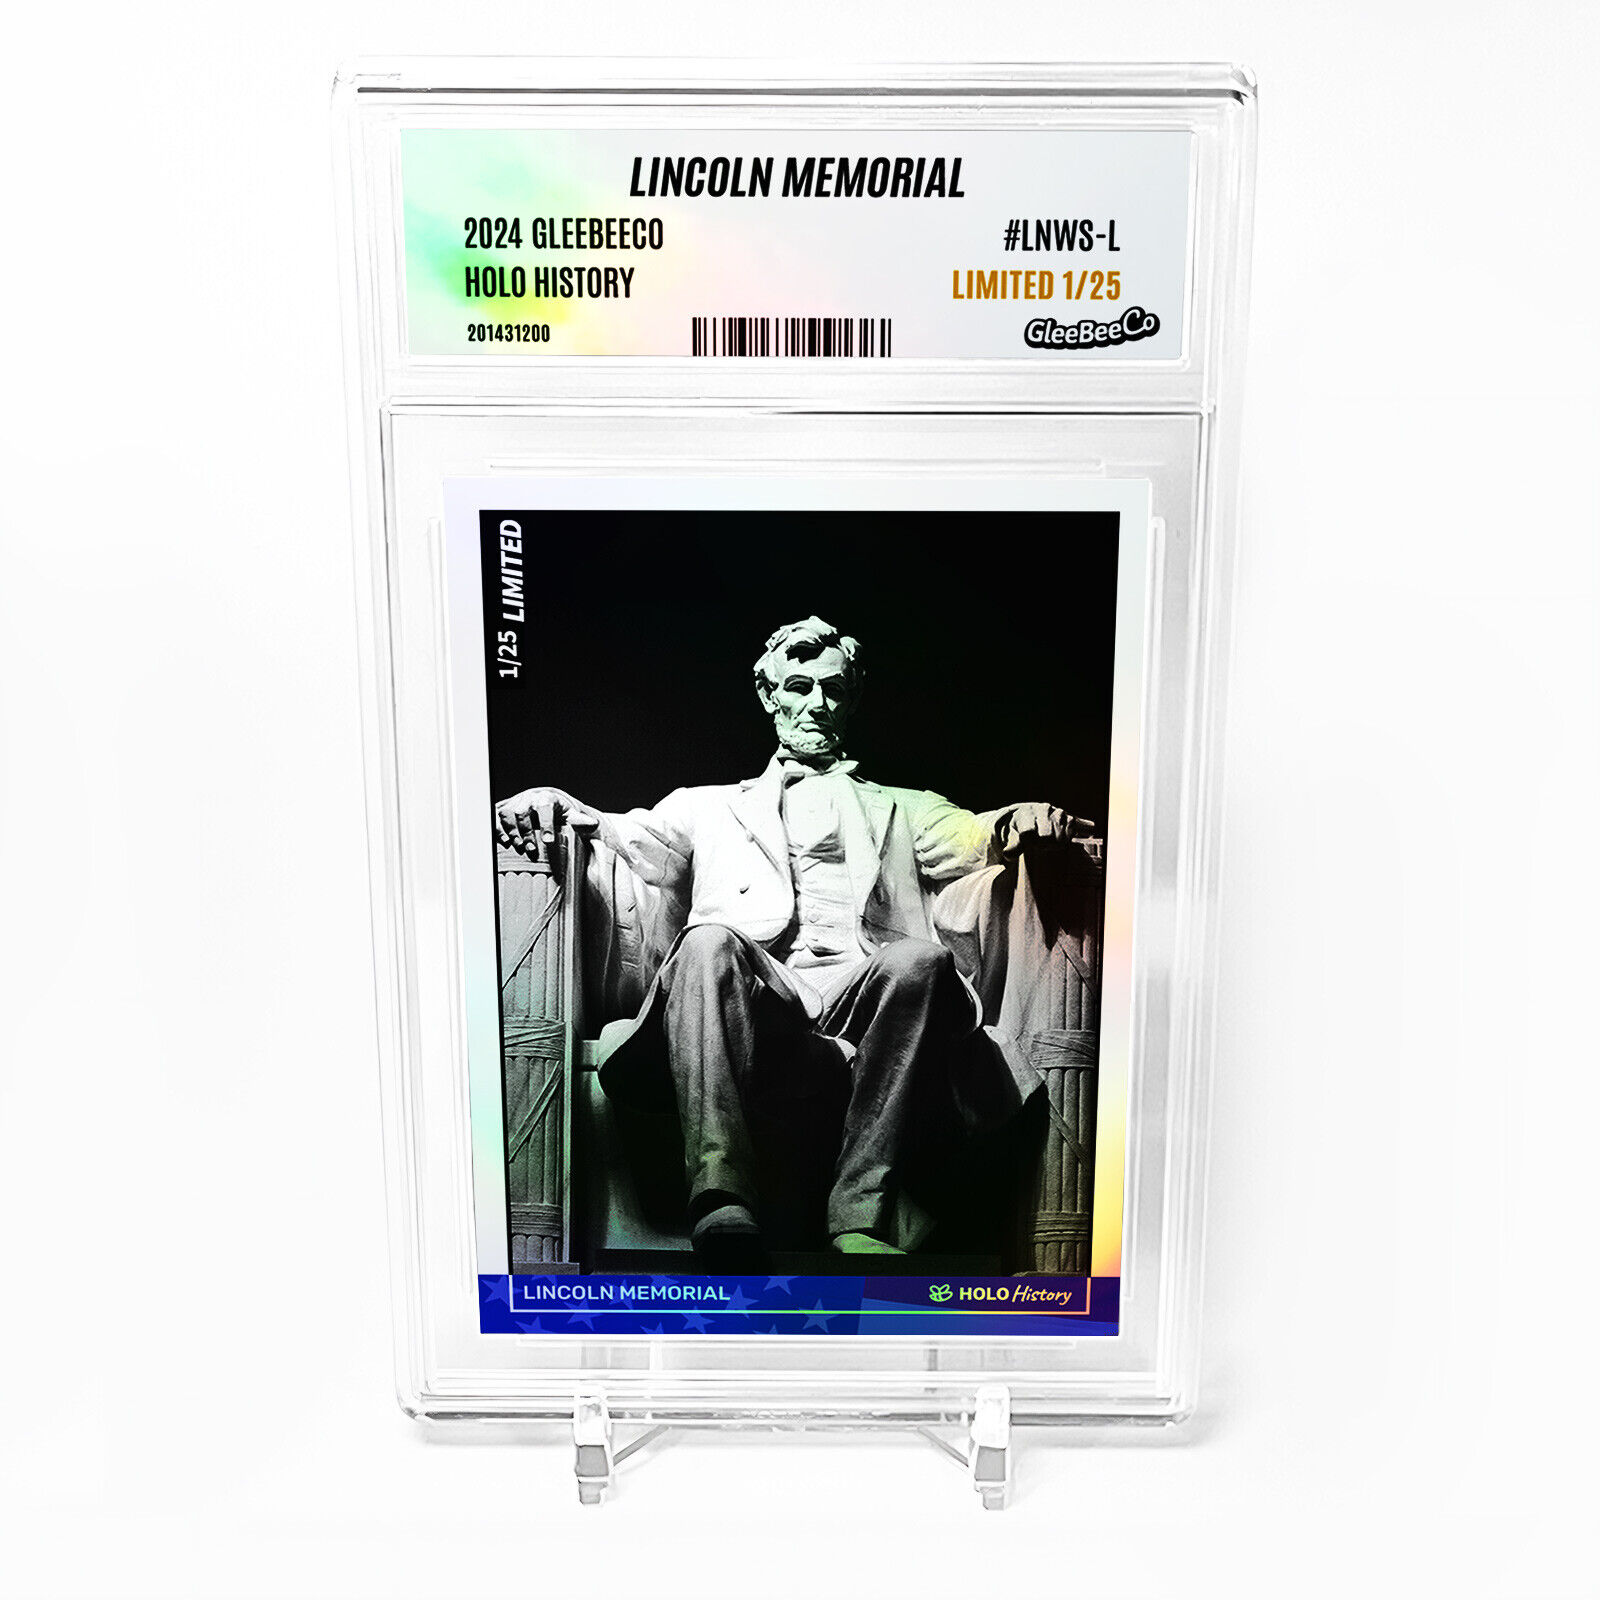 LINCOLN MEMORIAL Holographic Card 2024 GleeBeeCo Slabbed #LNWS-L Only /25